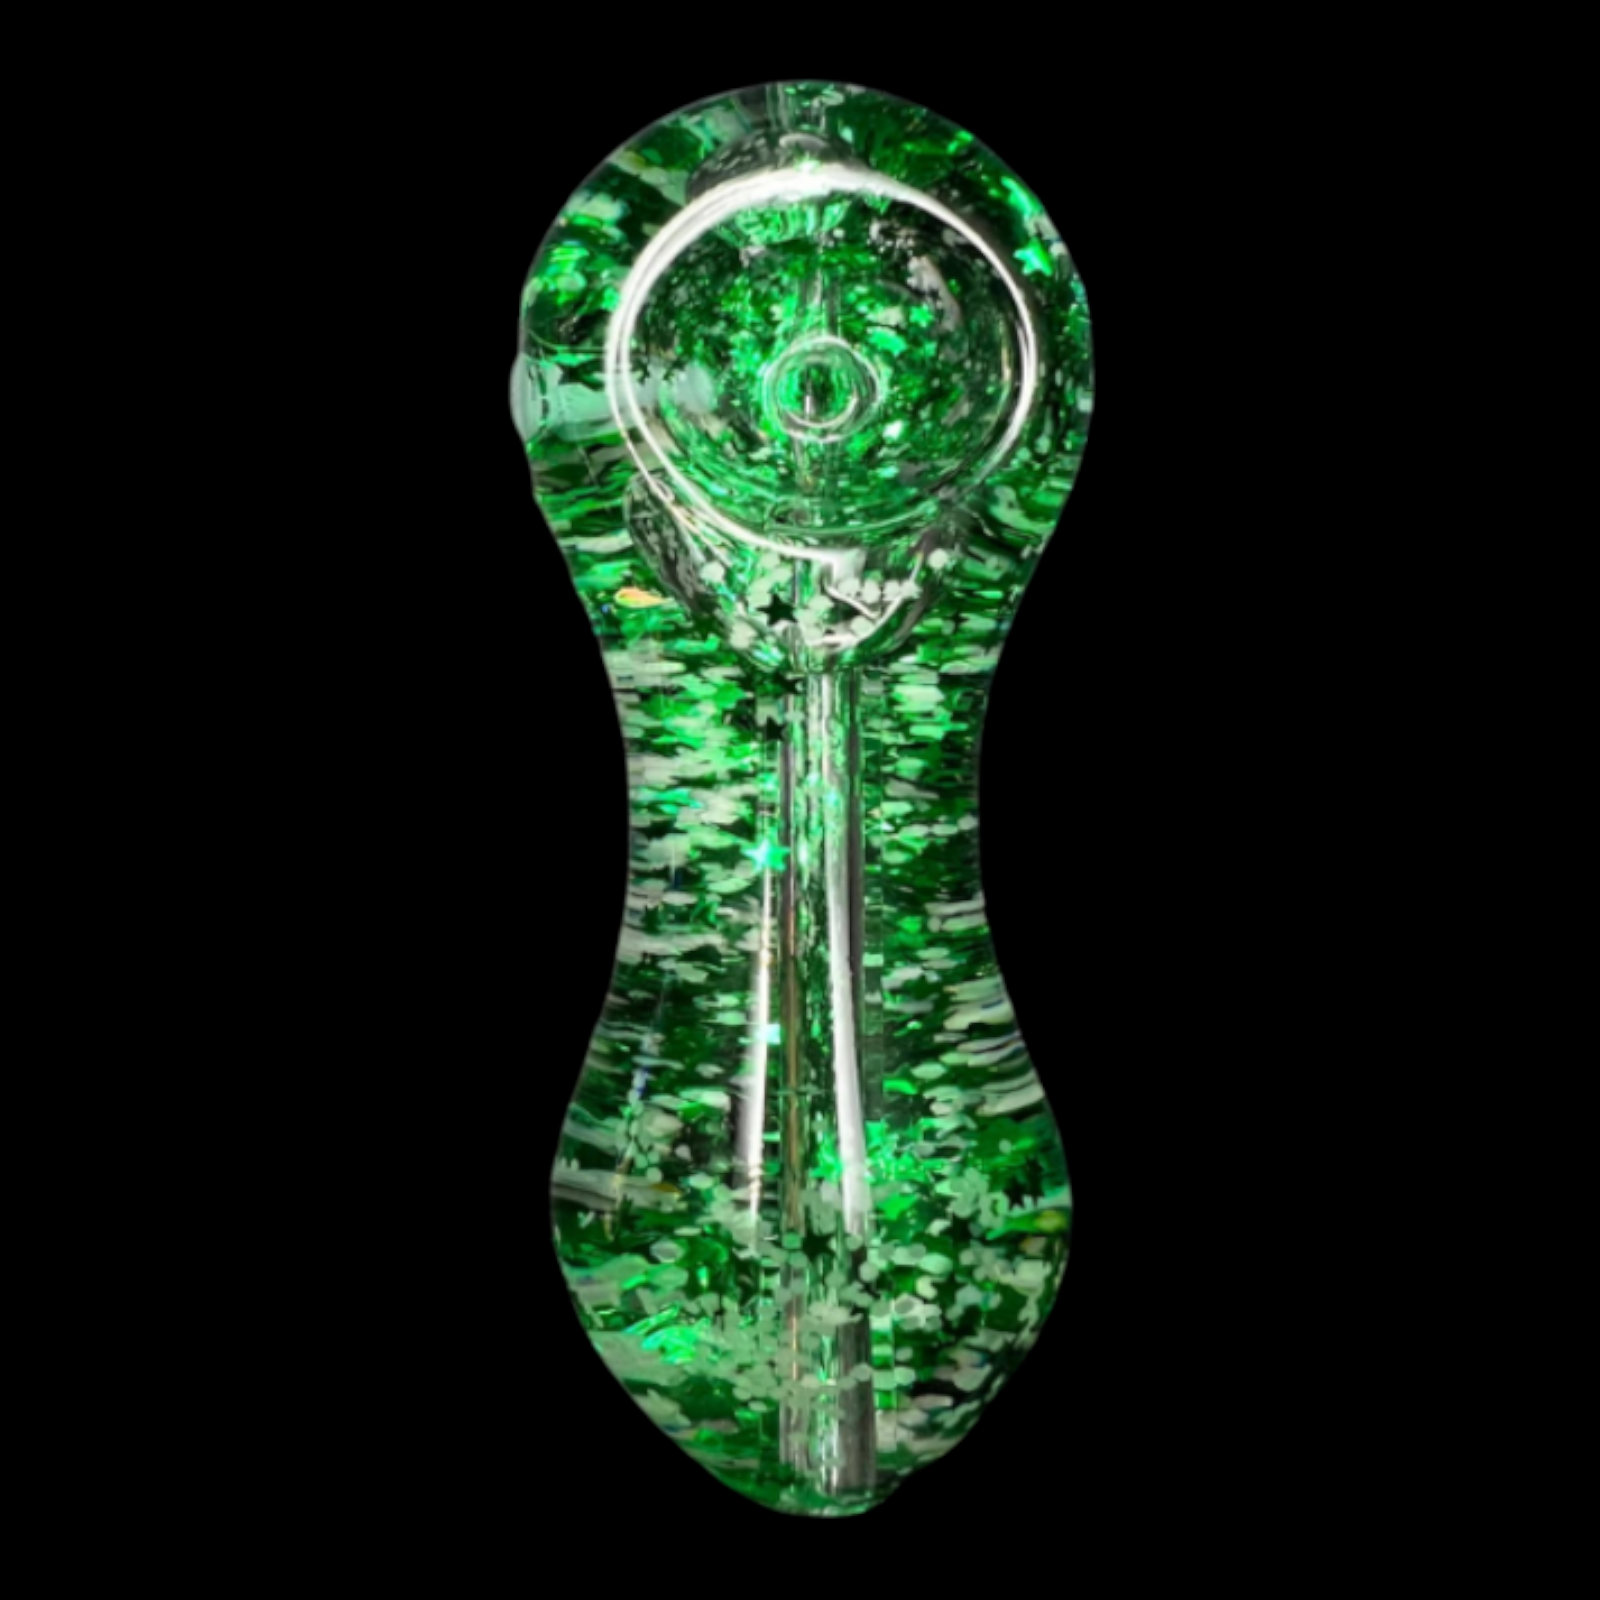  Glow in the dark view of Freezable Glow-in-the-Dark Glass Hand Pipe - Original Green